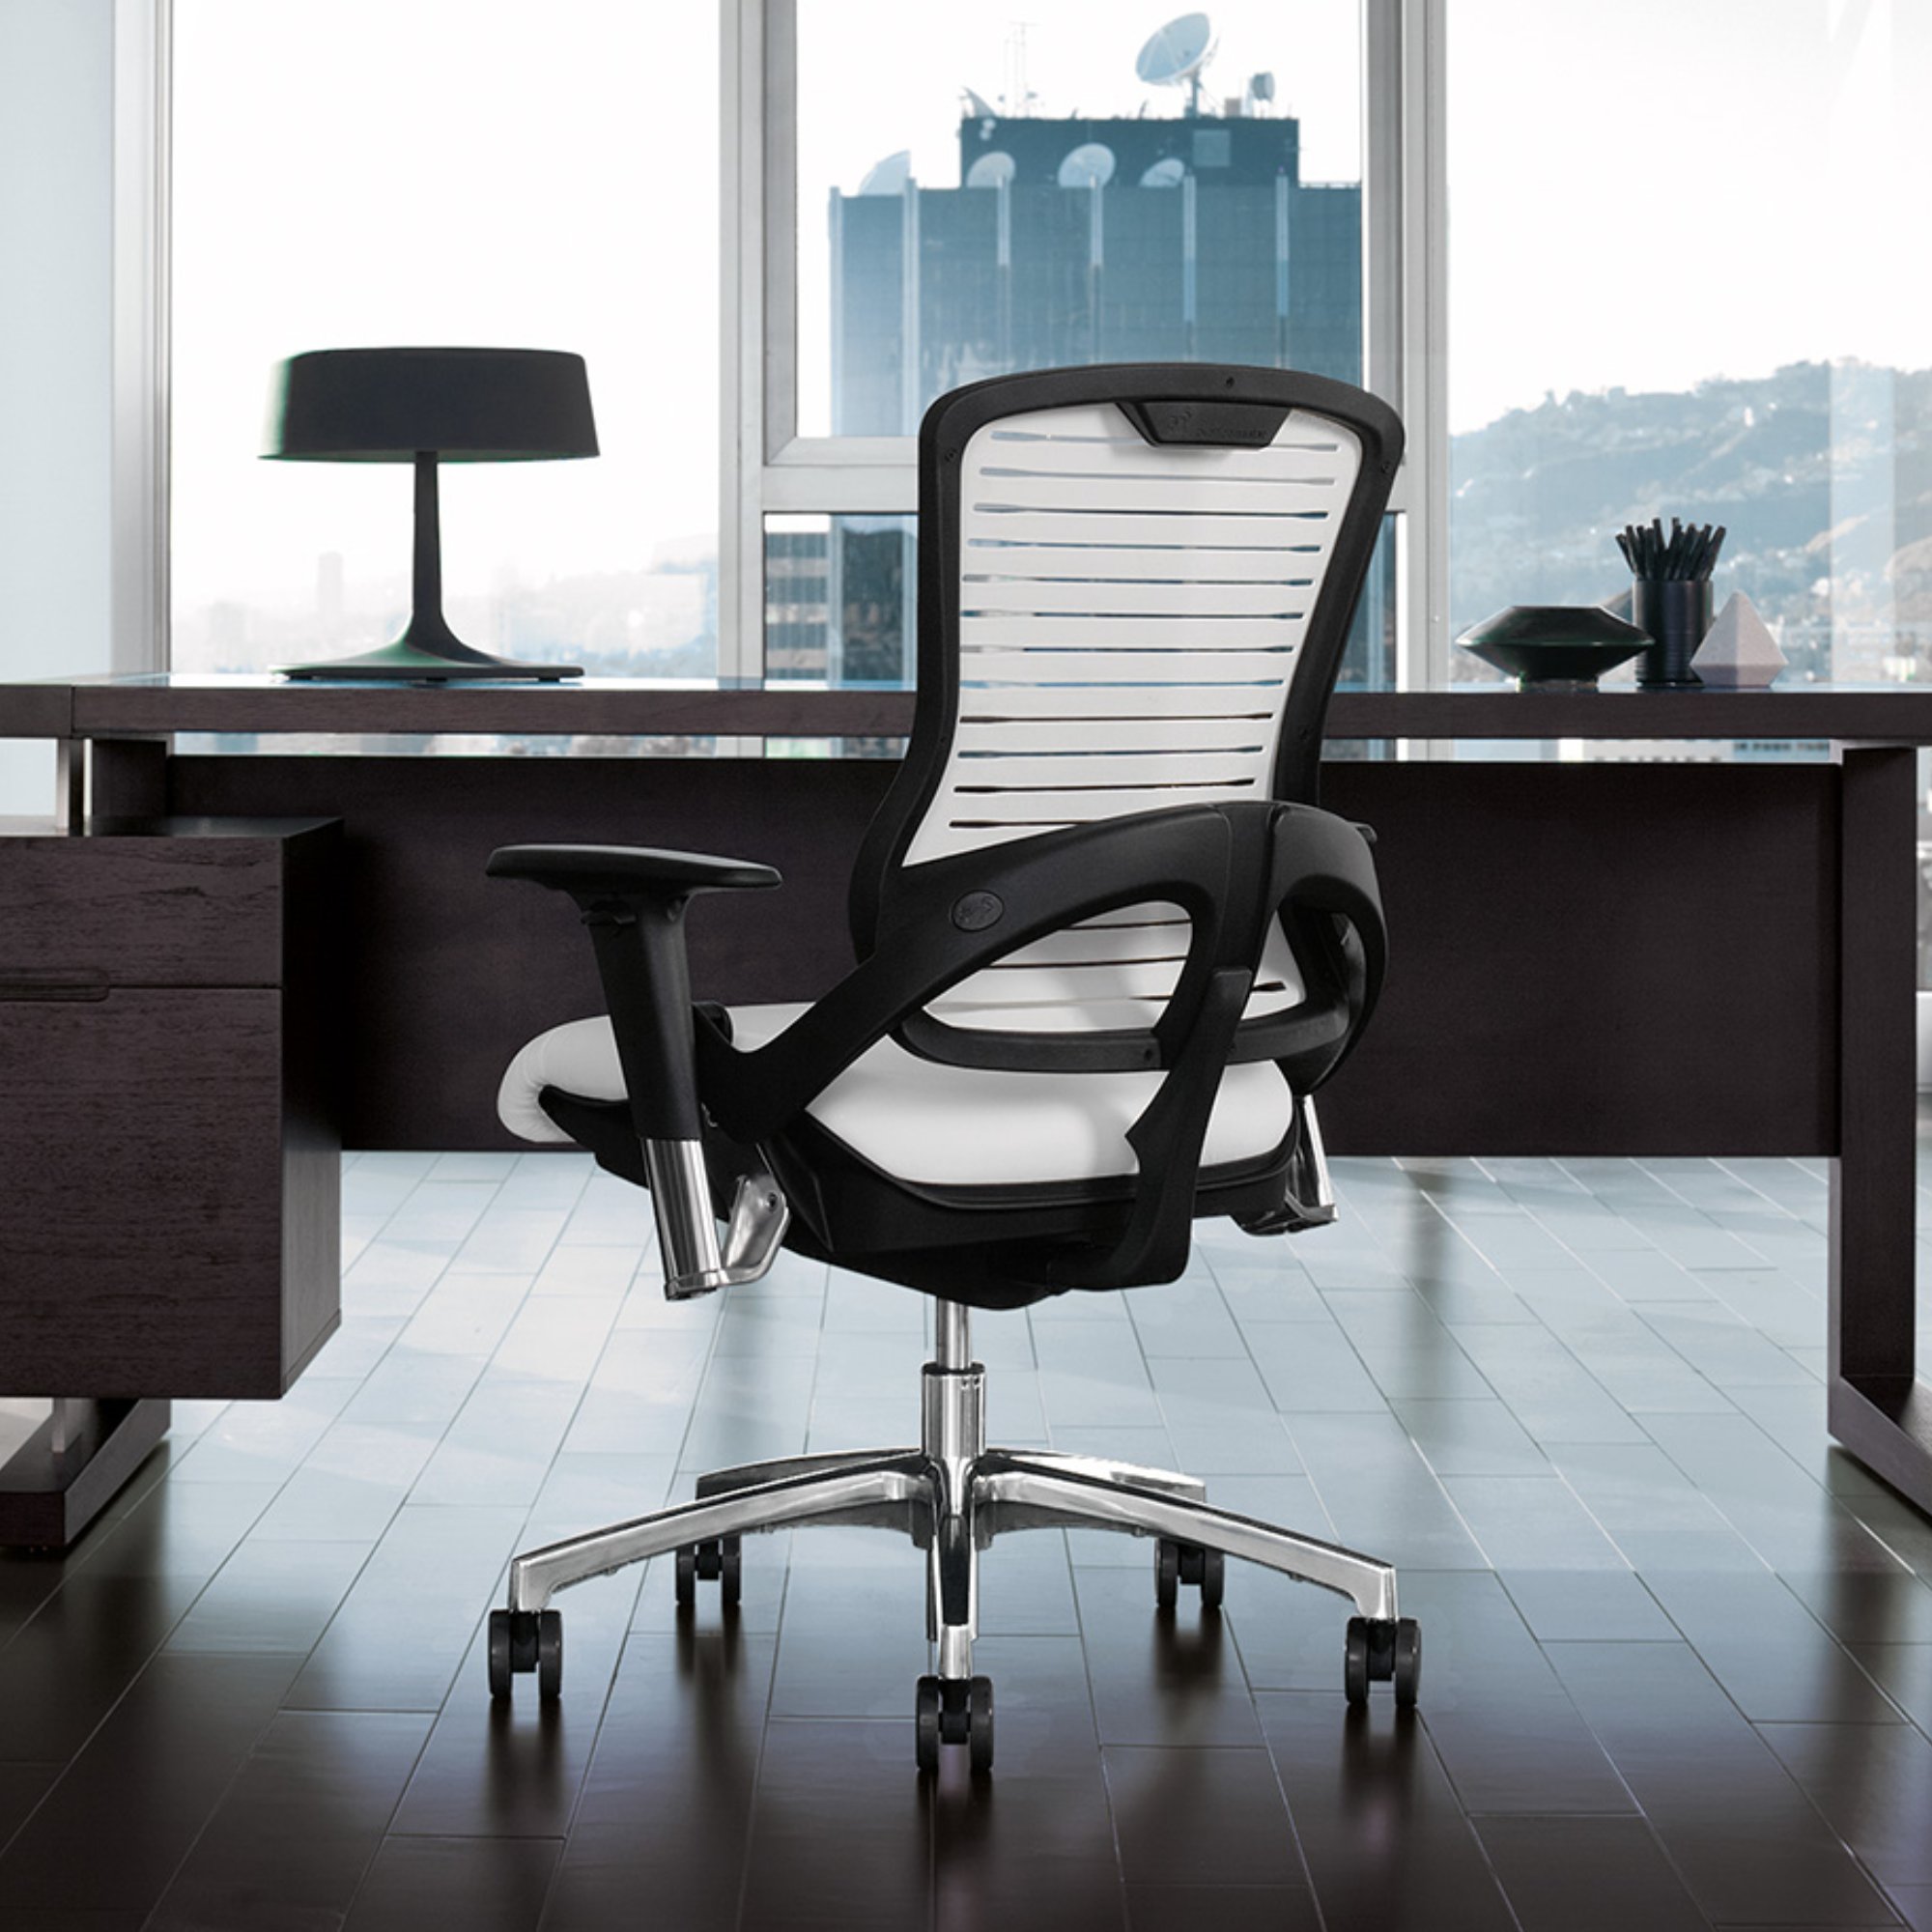 ED-OM5-EX Gaming Chair | Tall Back Executive Task Chair by OM-Seating